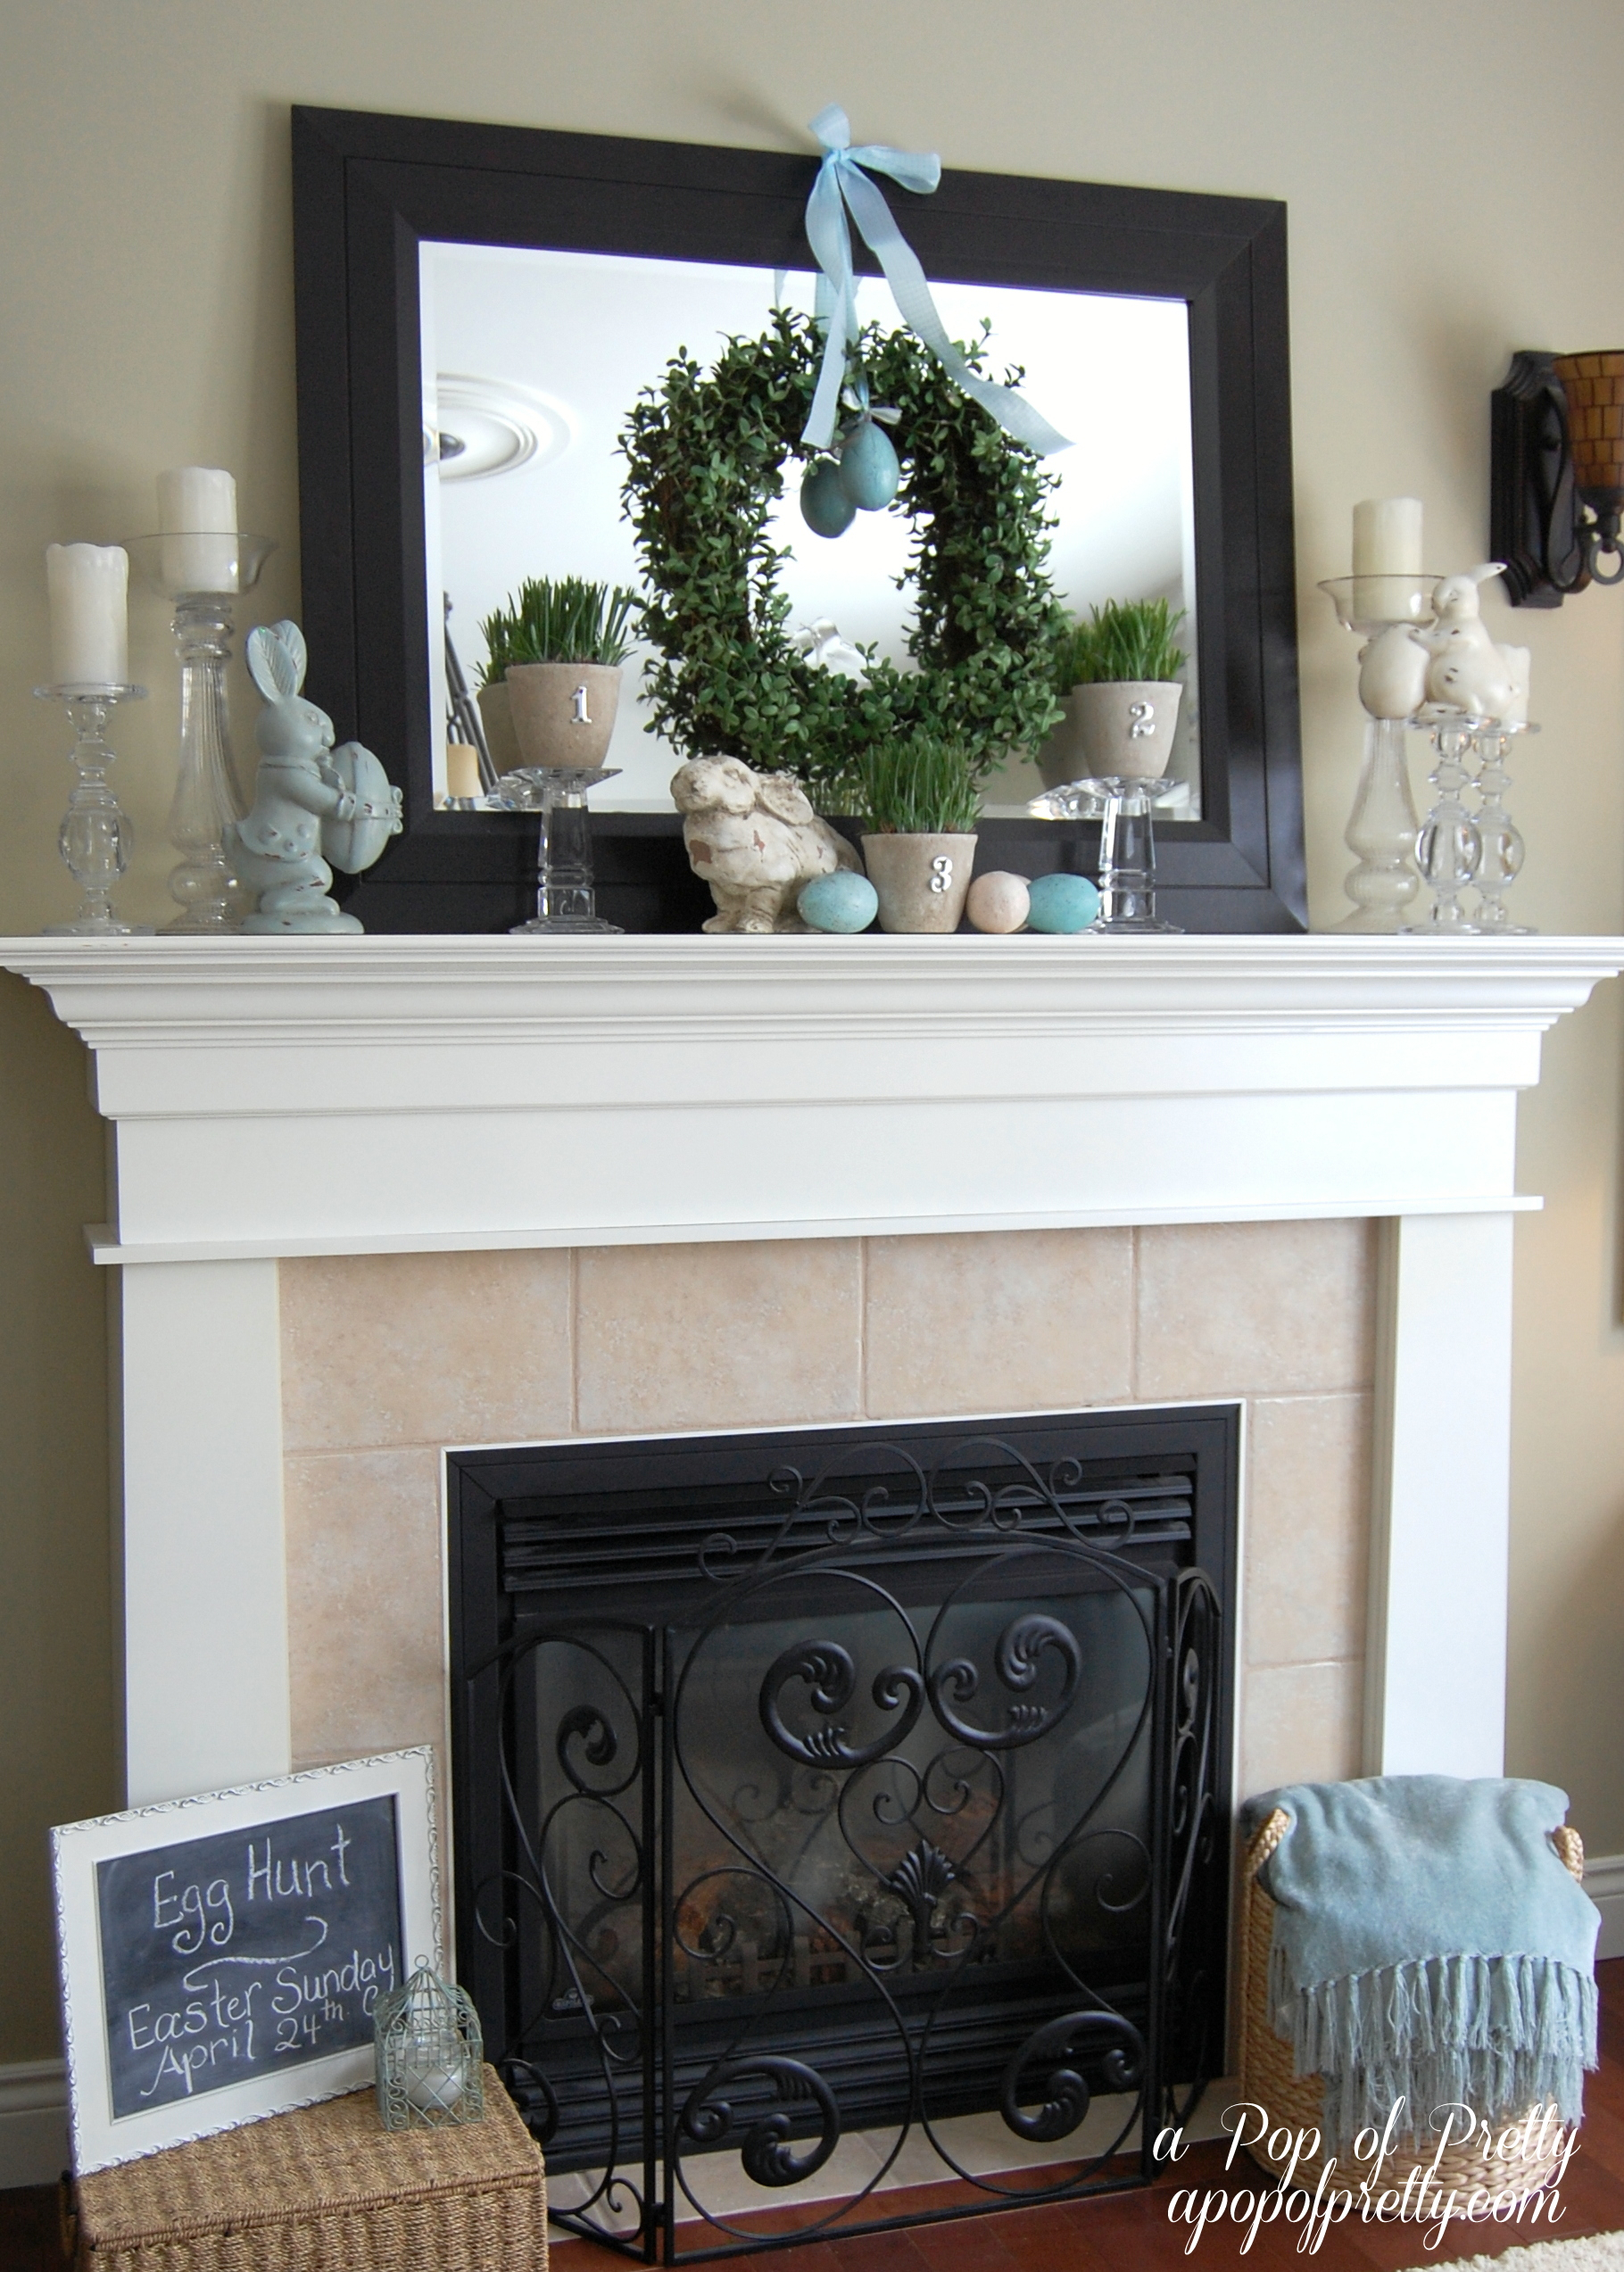 Easter Decorating Ideas - Mantel 2011 - A Pop Of Pretty